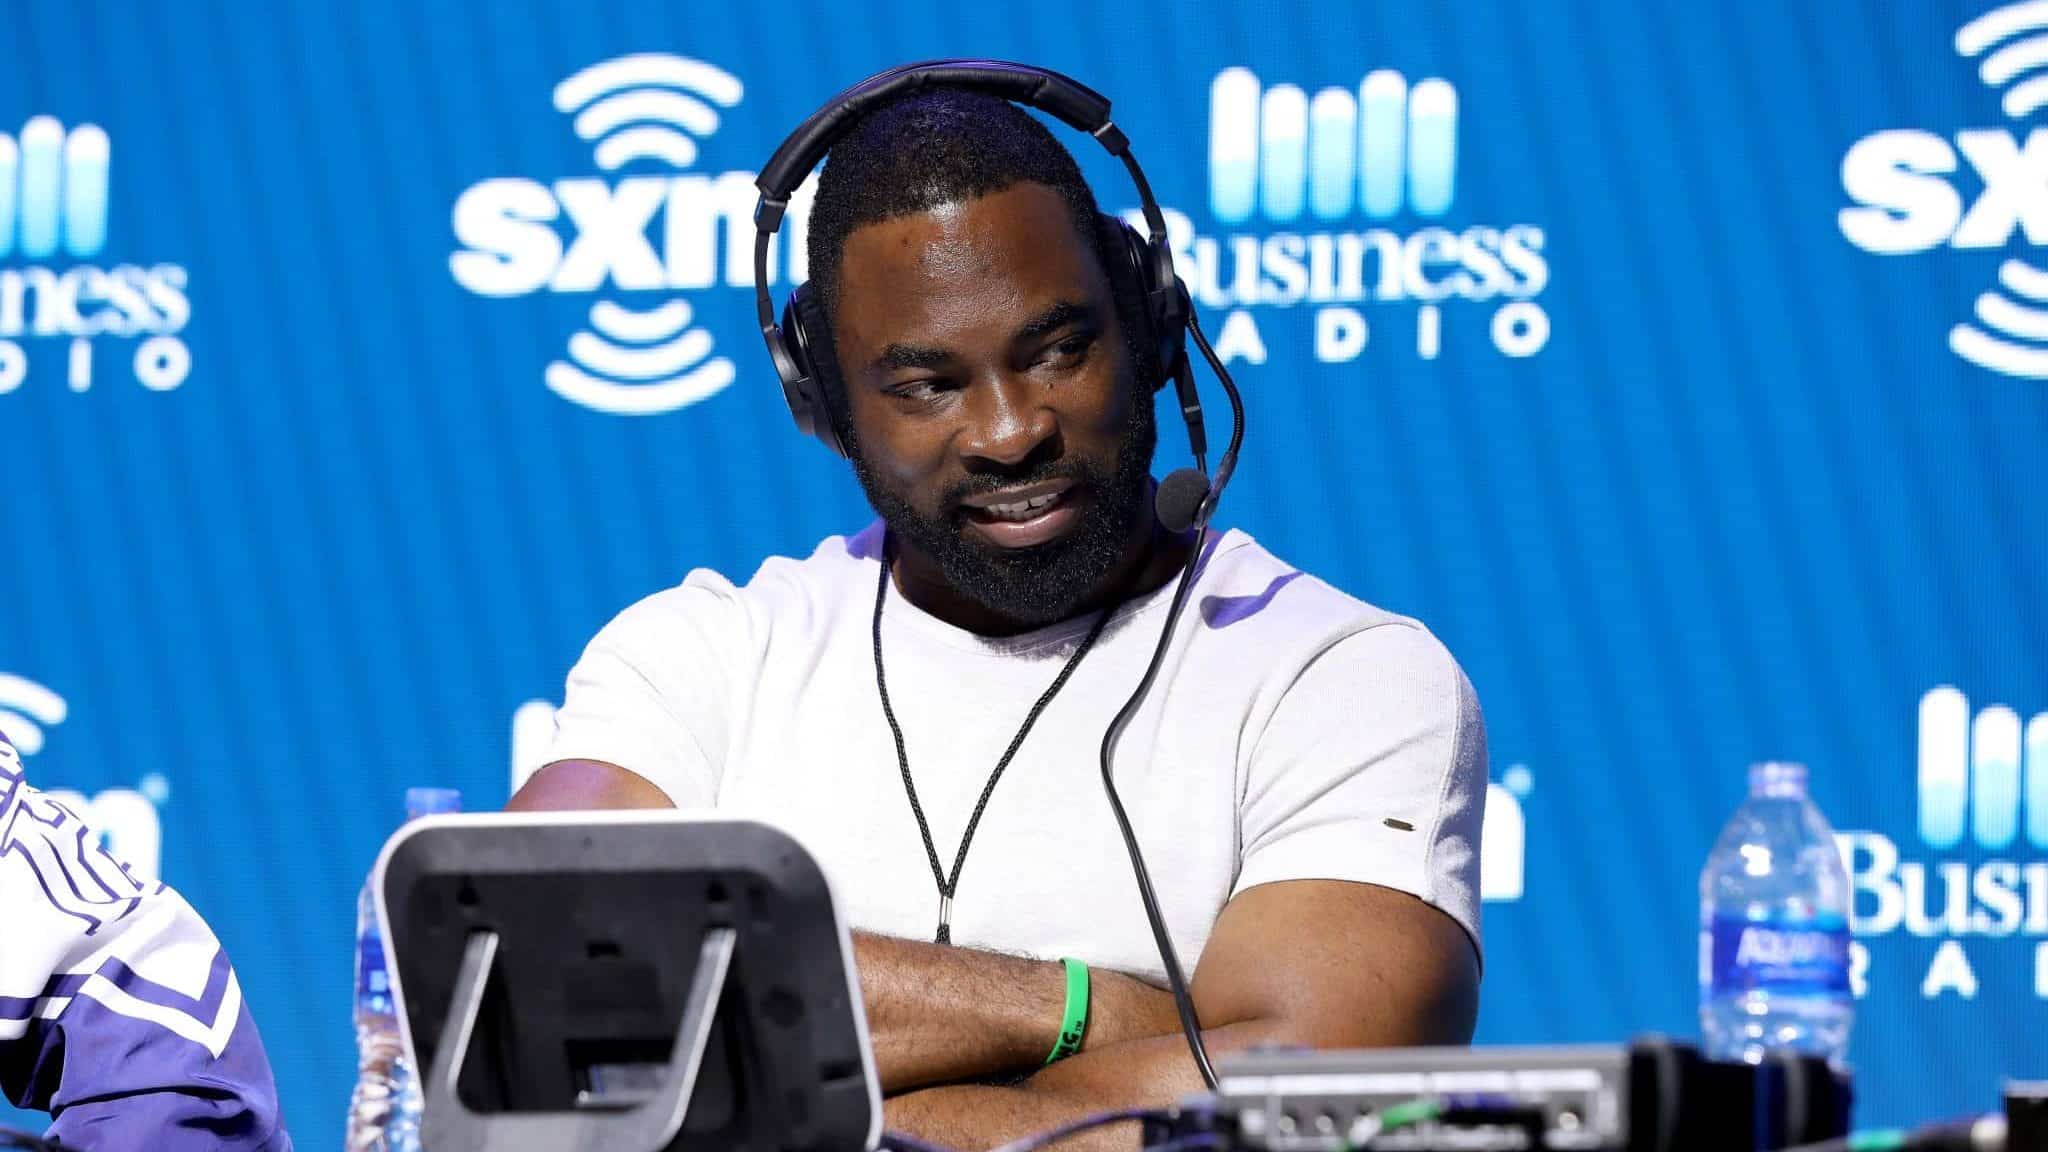 MIAMI, FLORIDA - JANUARY 30: Former NFL player Justin Tuck speaks onstage during day 2 of SiriusXM at Super Bowl LIV on January 30, 2020 in Miami, Florida.